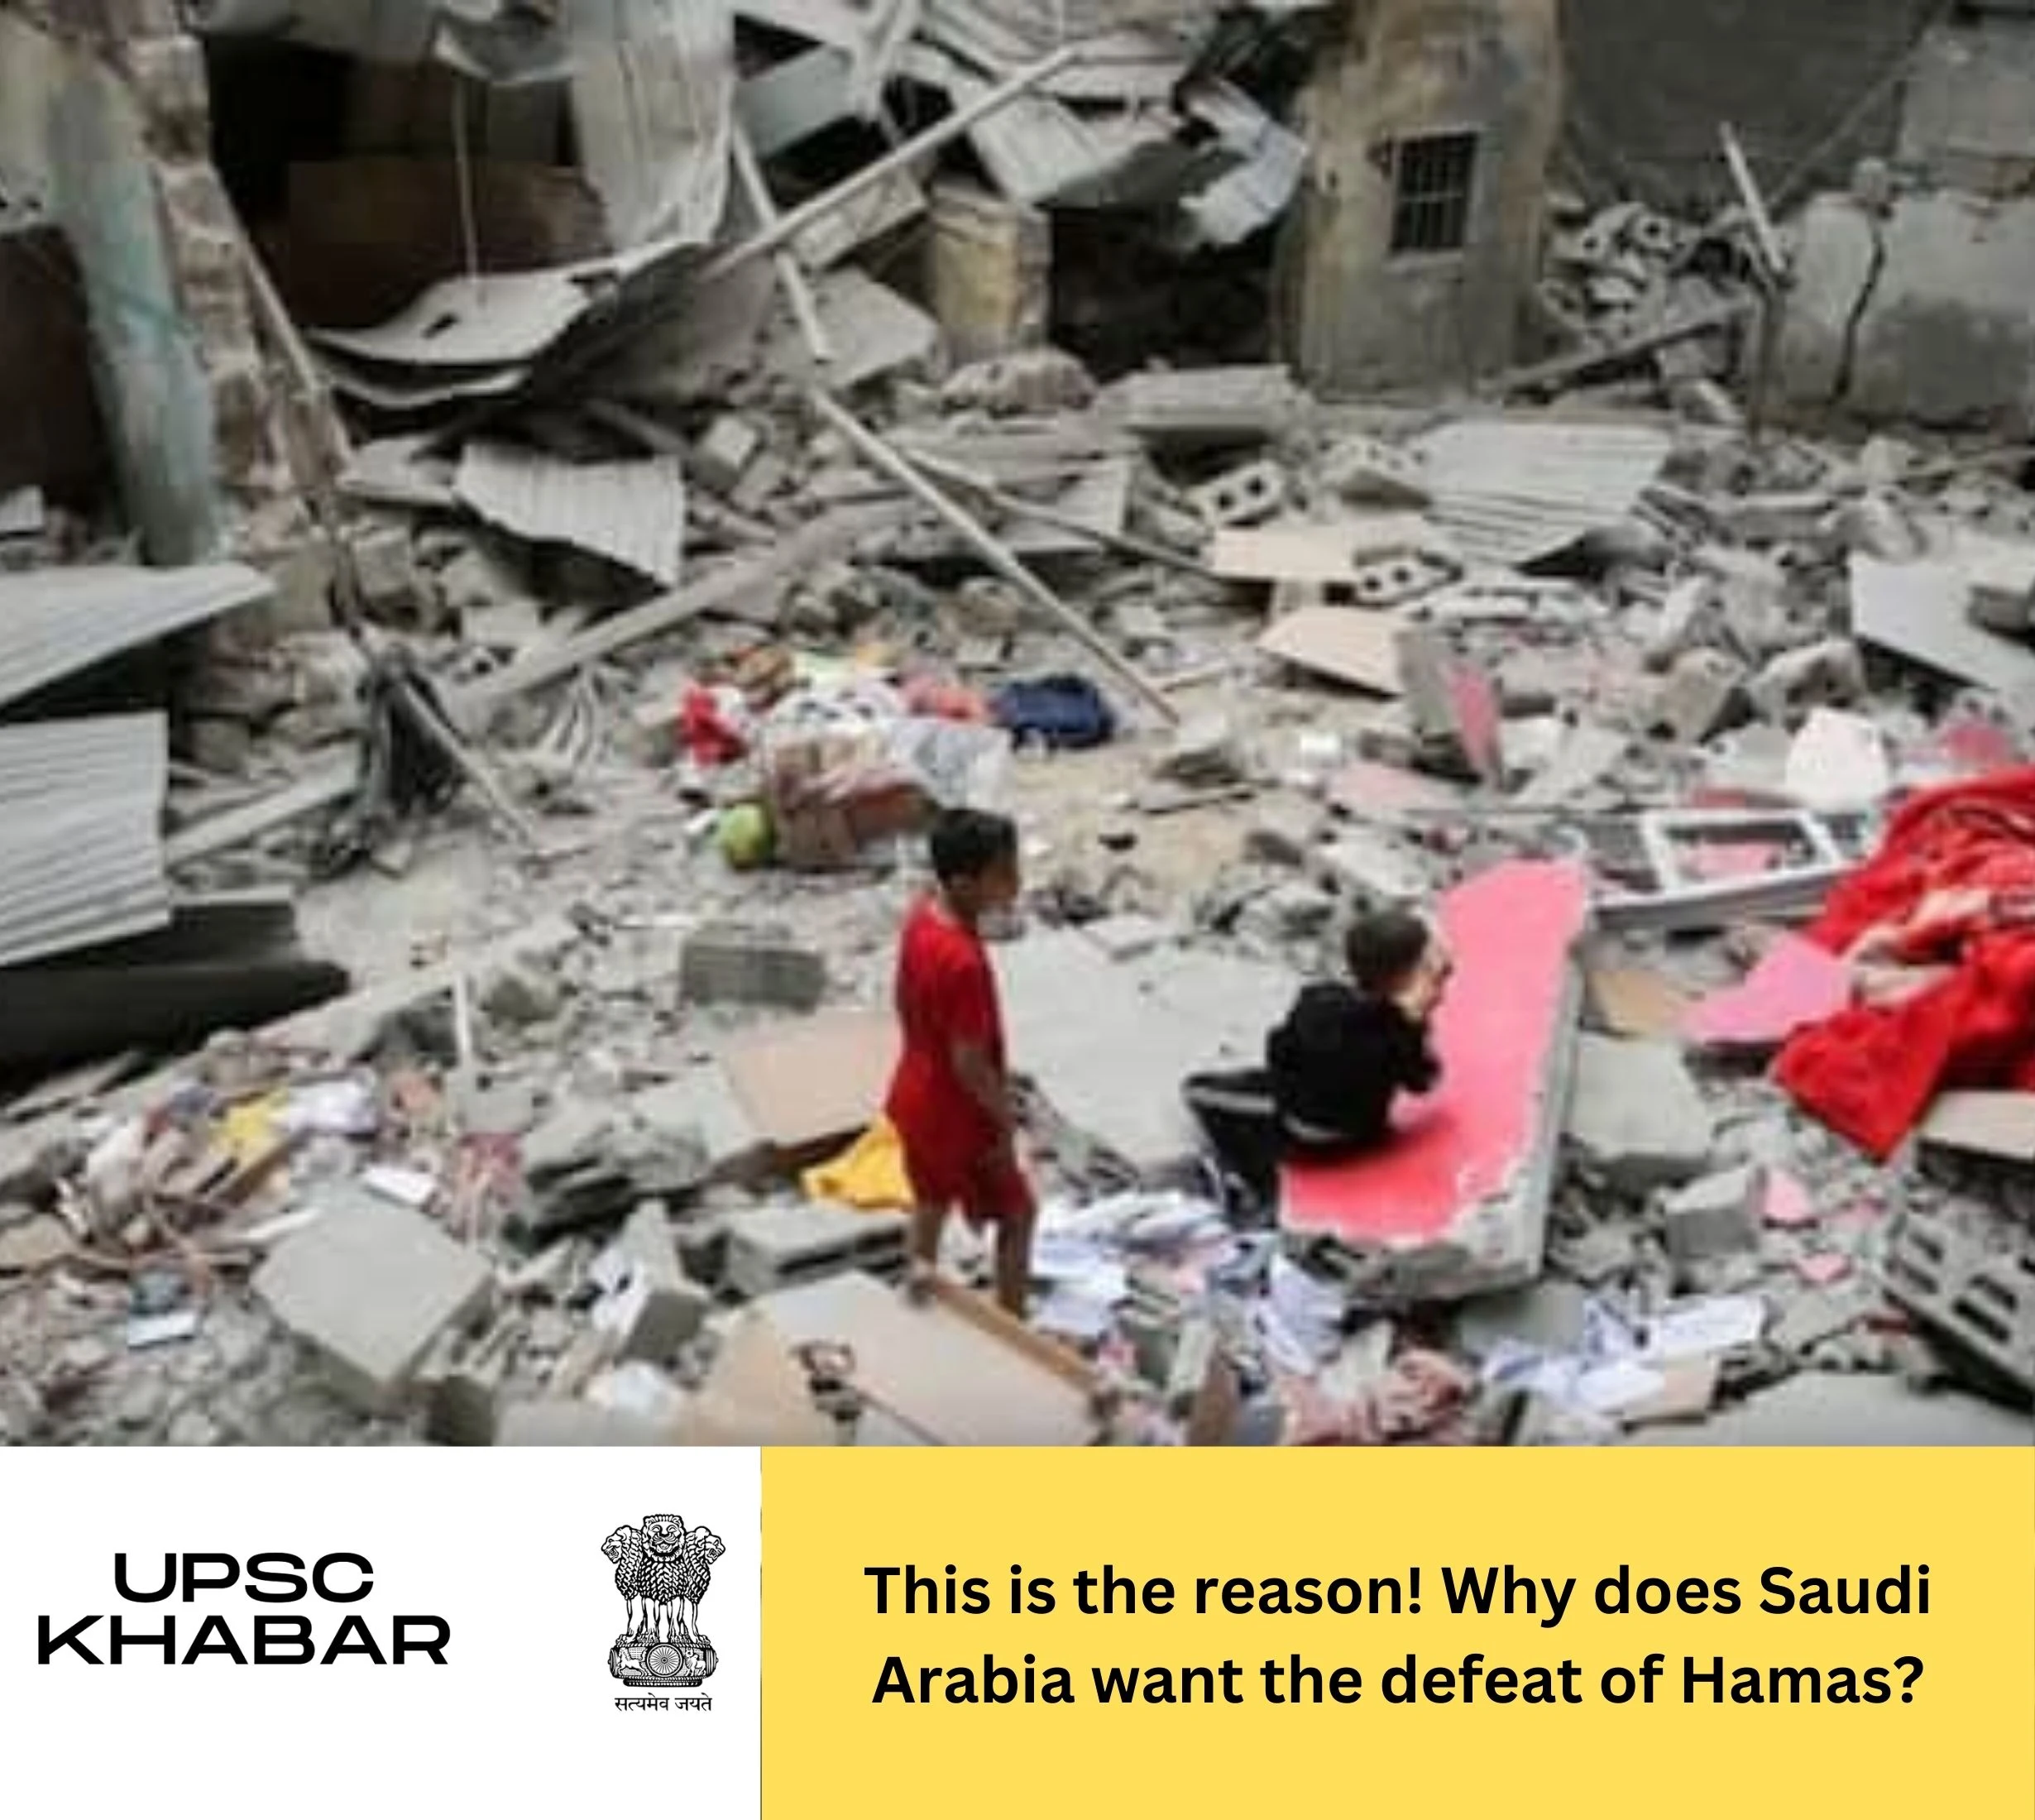 This is the reason! Why does Saudi Arabia want the defeat of Hamas?